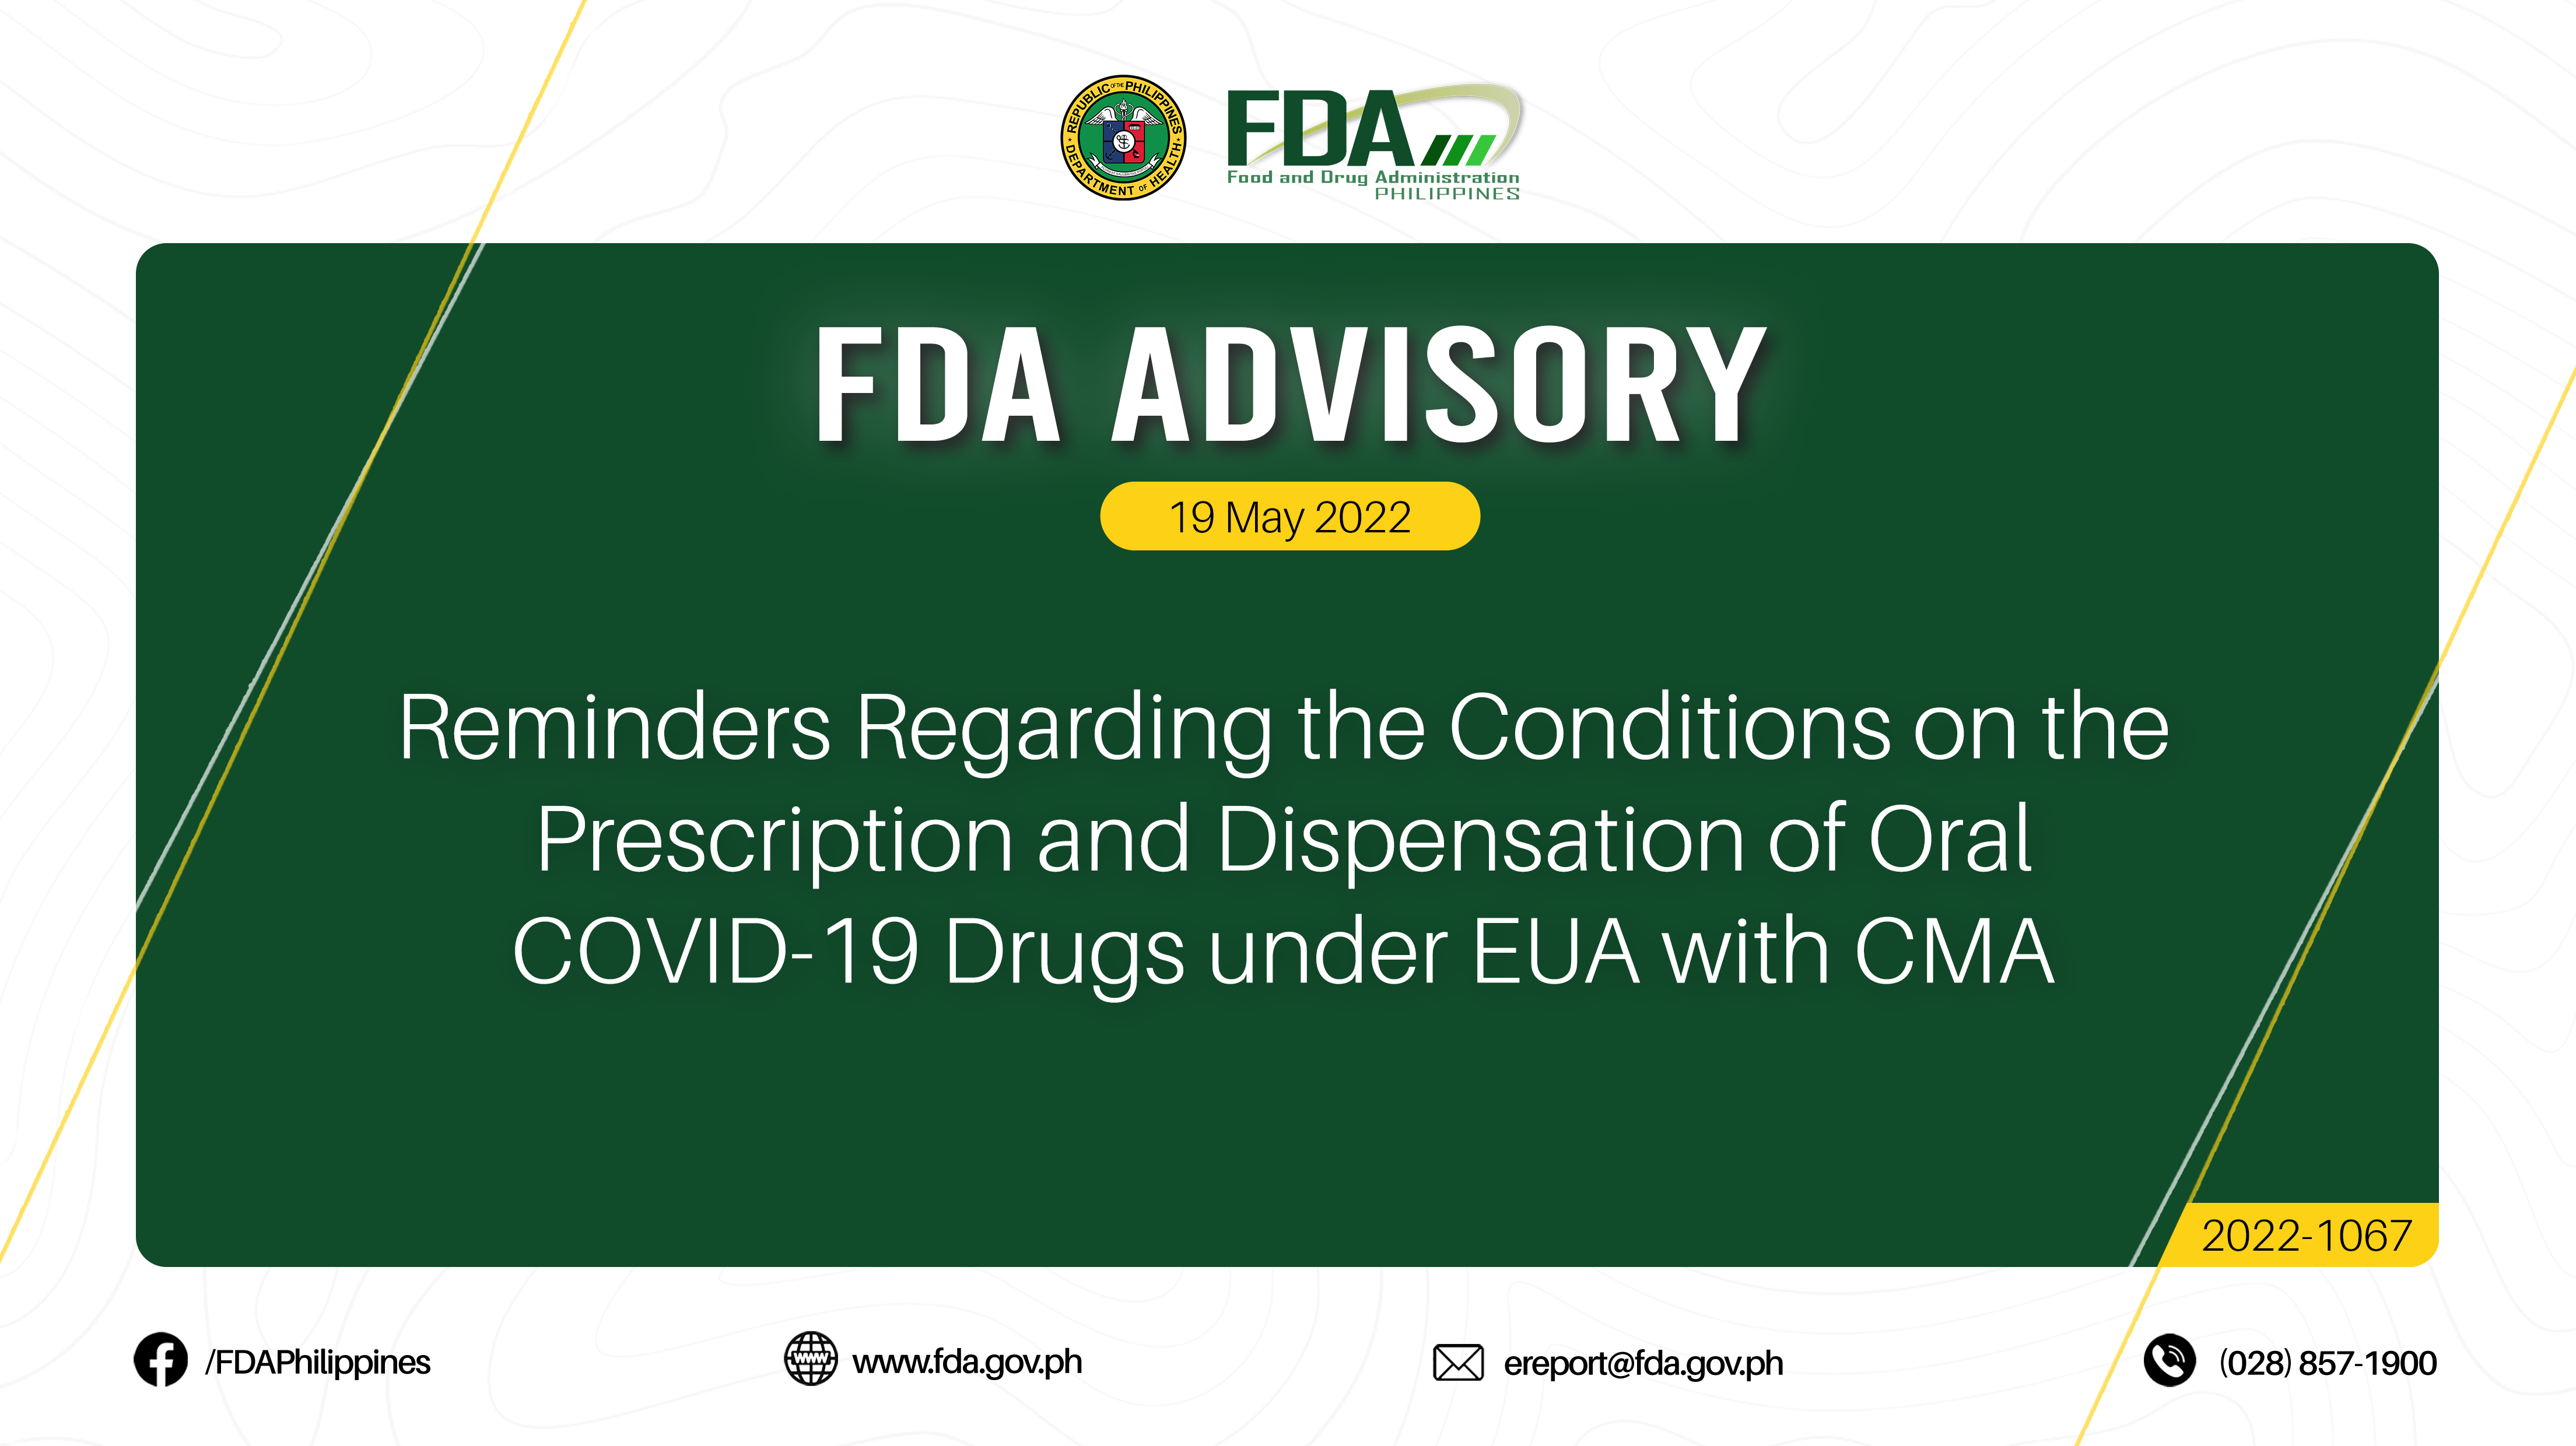 FDA Advisory No.2022-1067 || Reminders regarding the conditions on the prescription and dispensation of oral COVID-19 Drugs under EUA with CMA